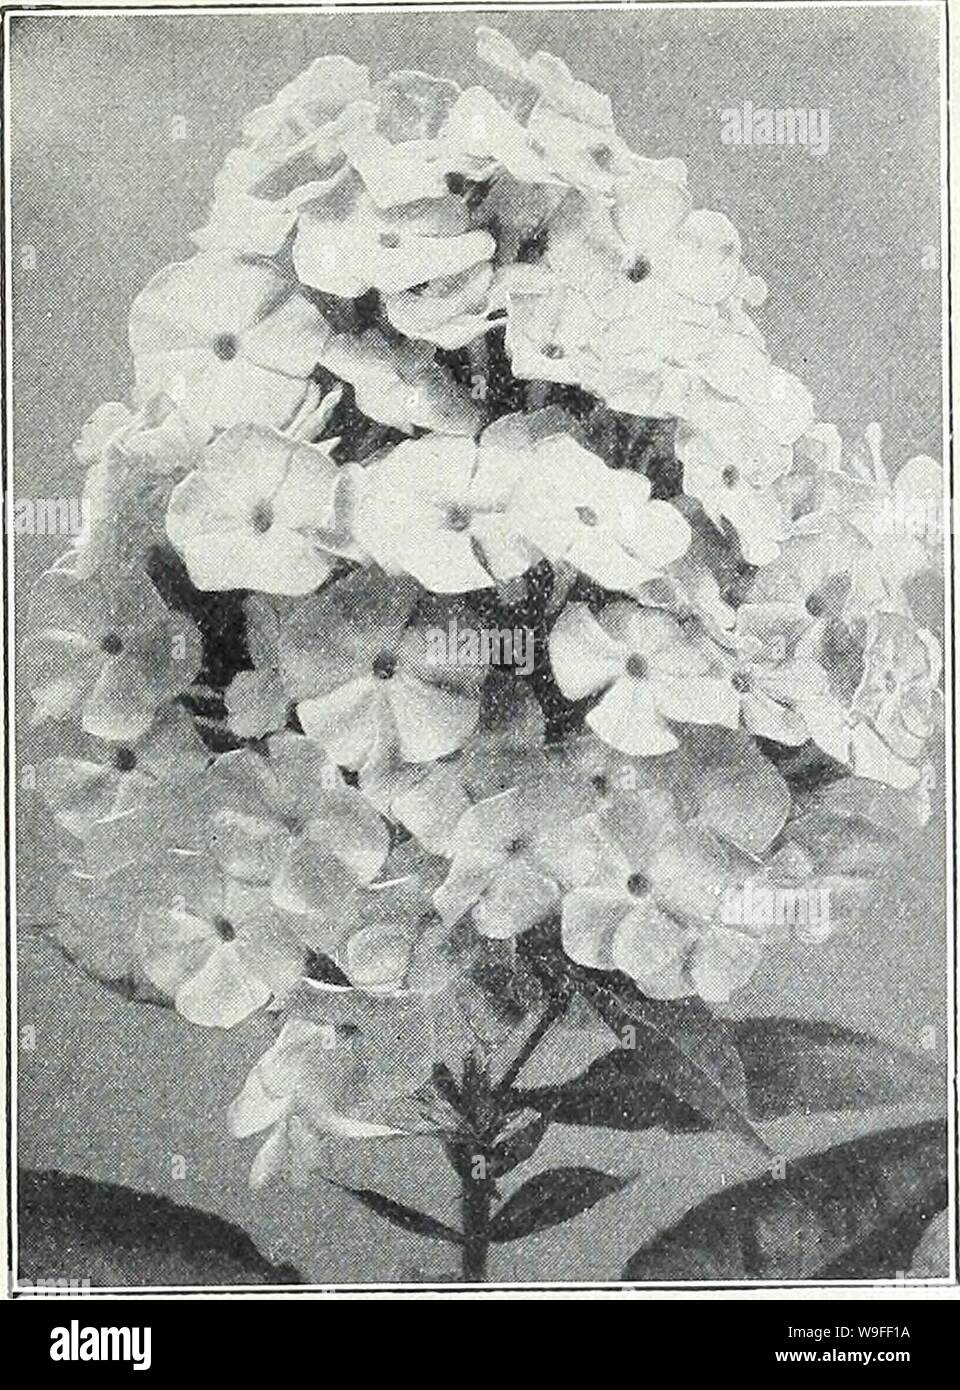 Archive image from page 36 of Currie's garden annual  spring. Currie's garden annual : spring 1934 59th year  curriesgardenann19curr 0 Year: 1934 ( CURRIE BROTHERS CO., MILWAUKEE, WIS. Page 33    PASSIFLORA (Passion Flower) COERULEA—A rapid-growing vine for the con- servatory or window. The flowers are a beautiful sky-blue, and are produced freely on a rich back- ground of handsome green foliage Pkt. 10c PENNISETUM (Fountain Grass) Ornamental grasses with beautiful, feathery plumes, useful for edging beds of Cannas and other tall-growing plants. LONGISTYLUM—Graceful, soft, greenish-white feath Stock Photo